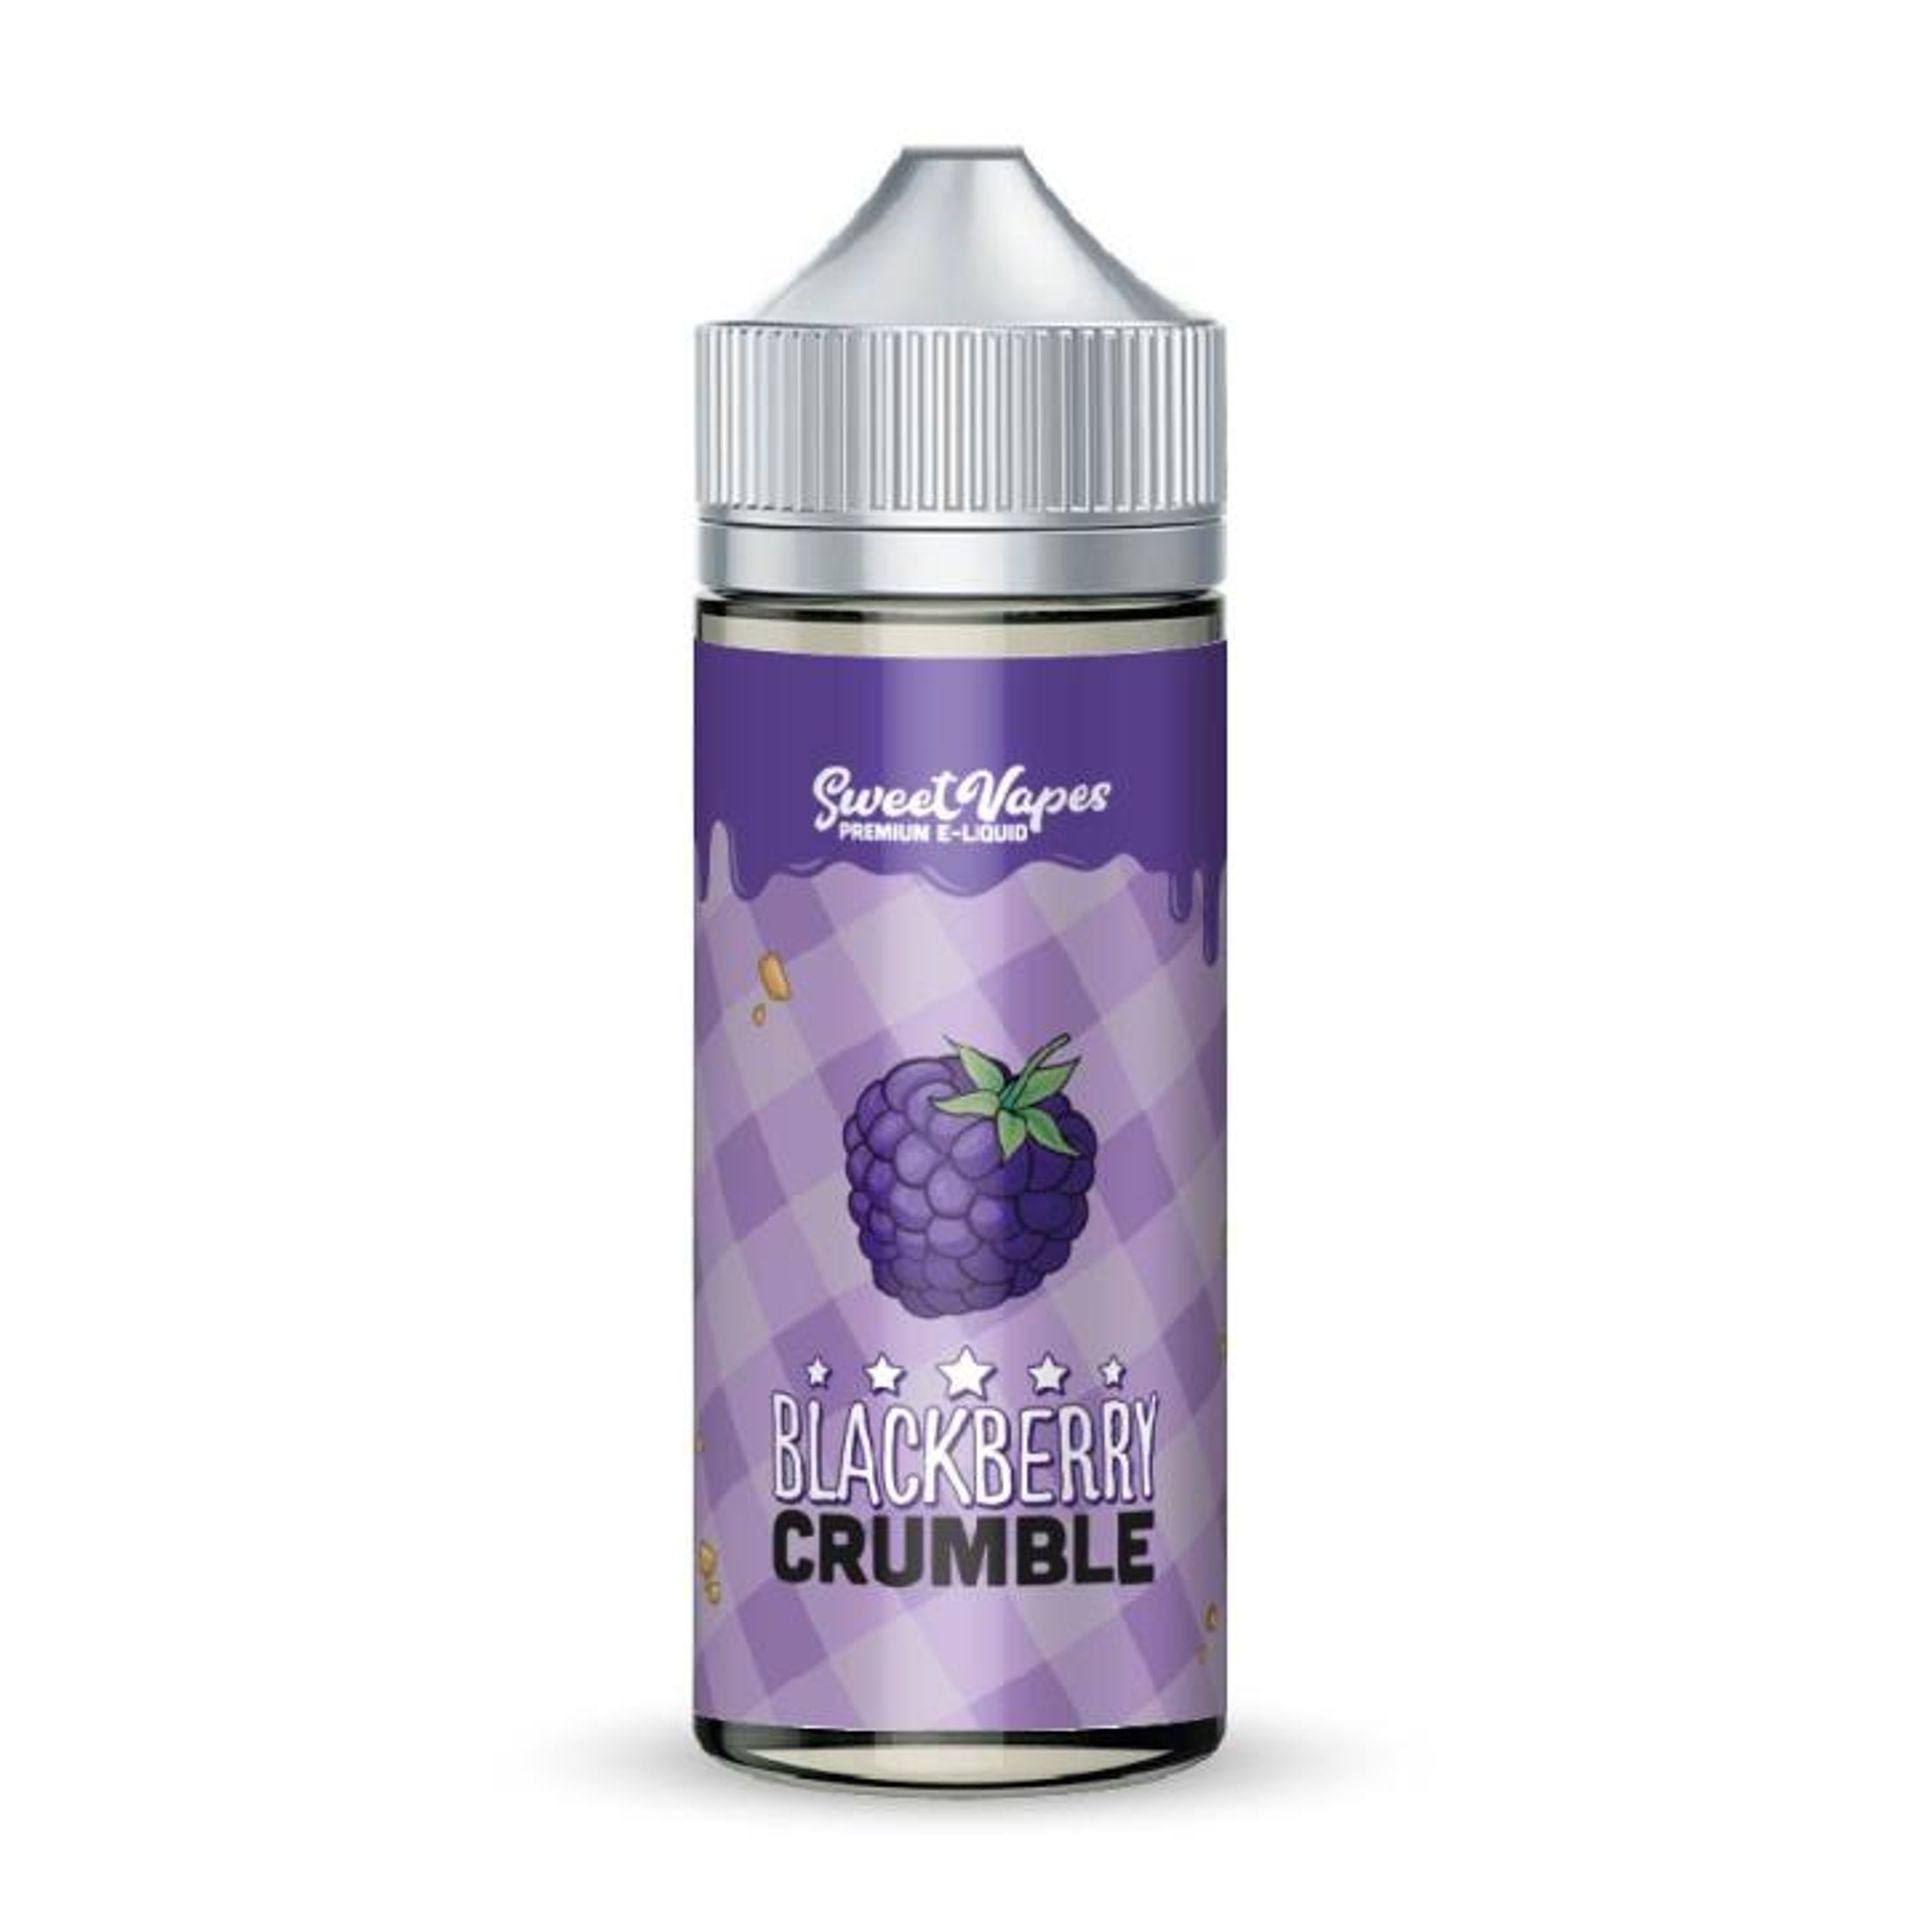 Image of Blackberry Crumble by Sweet Vapes